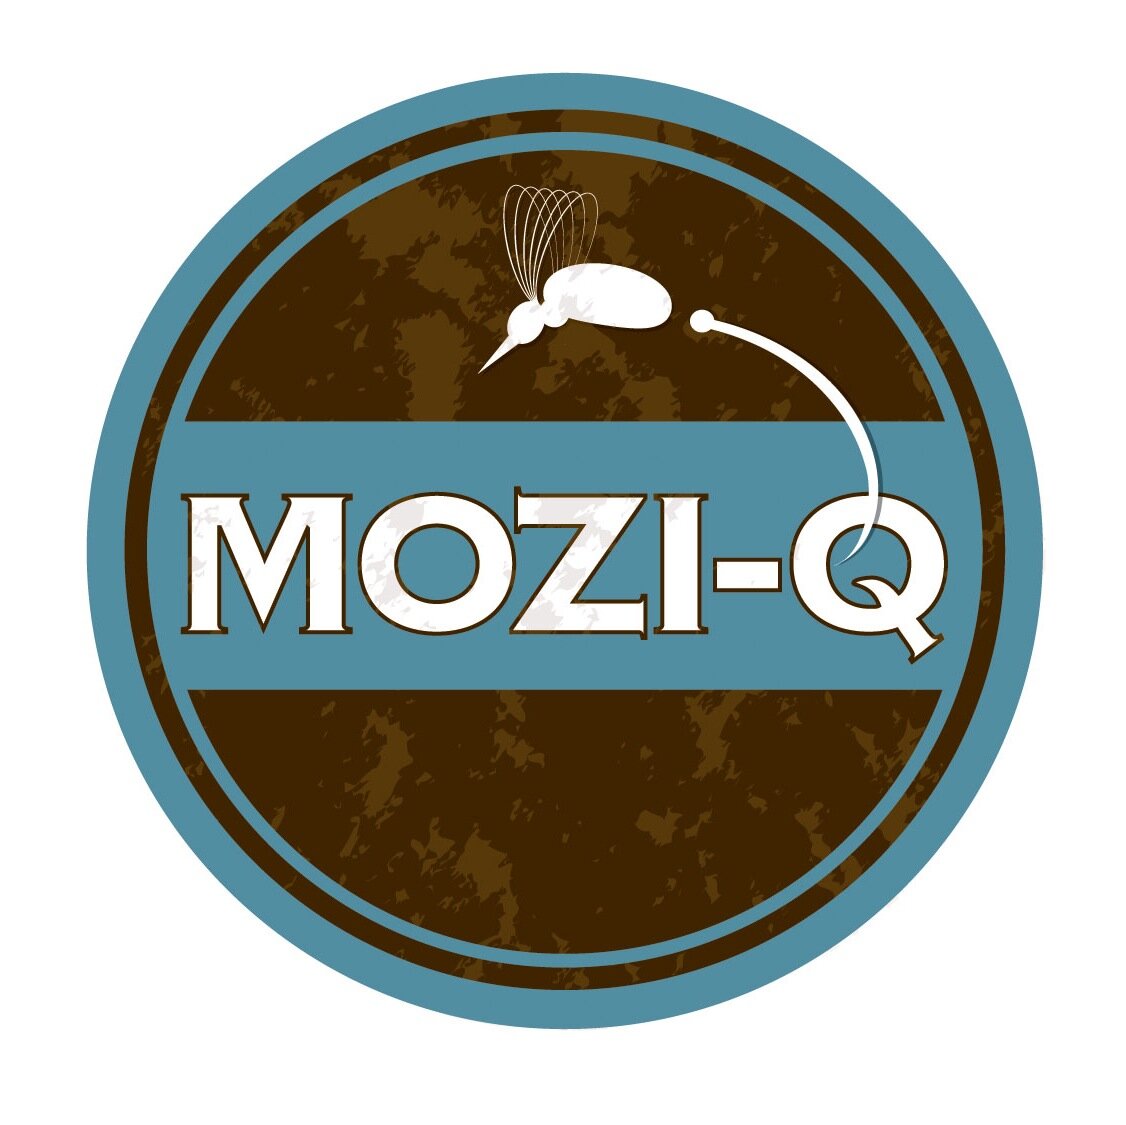 Mozi-Q is the  safe, all natural insect repellent you eat!  #BtheChange #cbcdragonsden